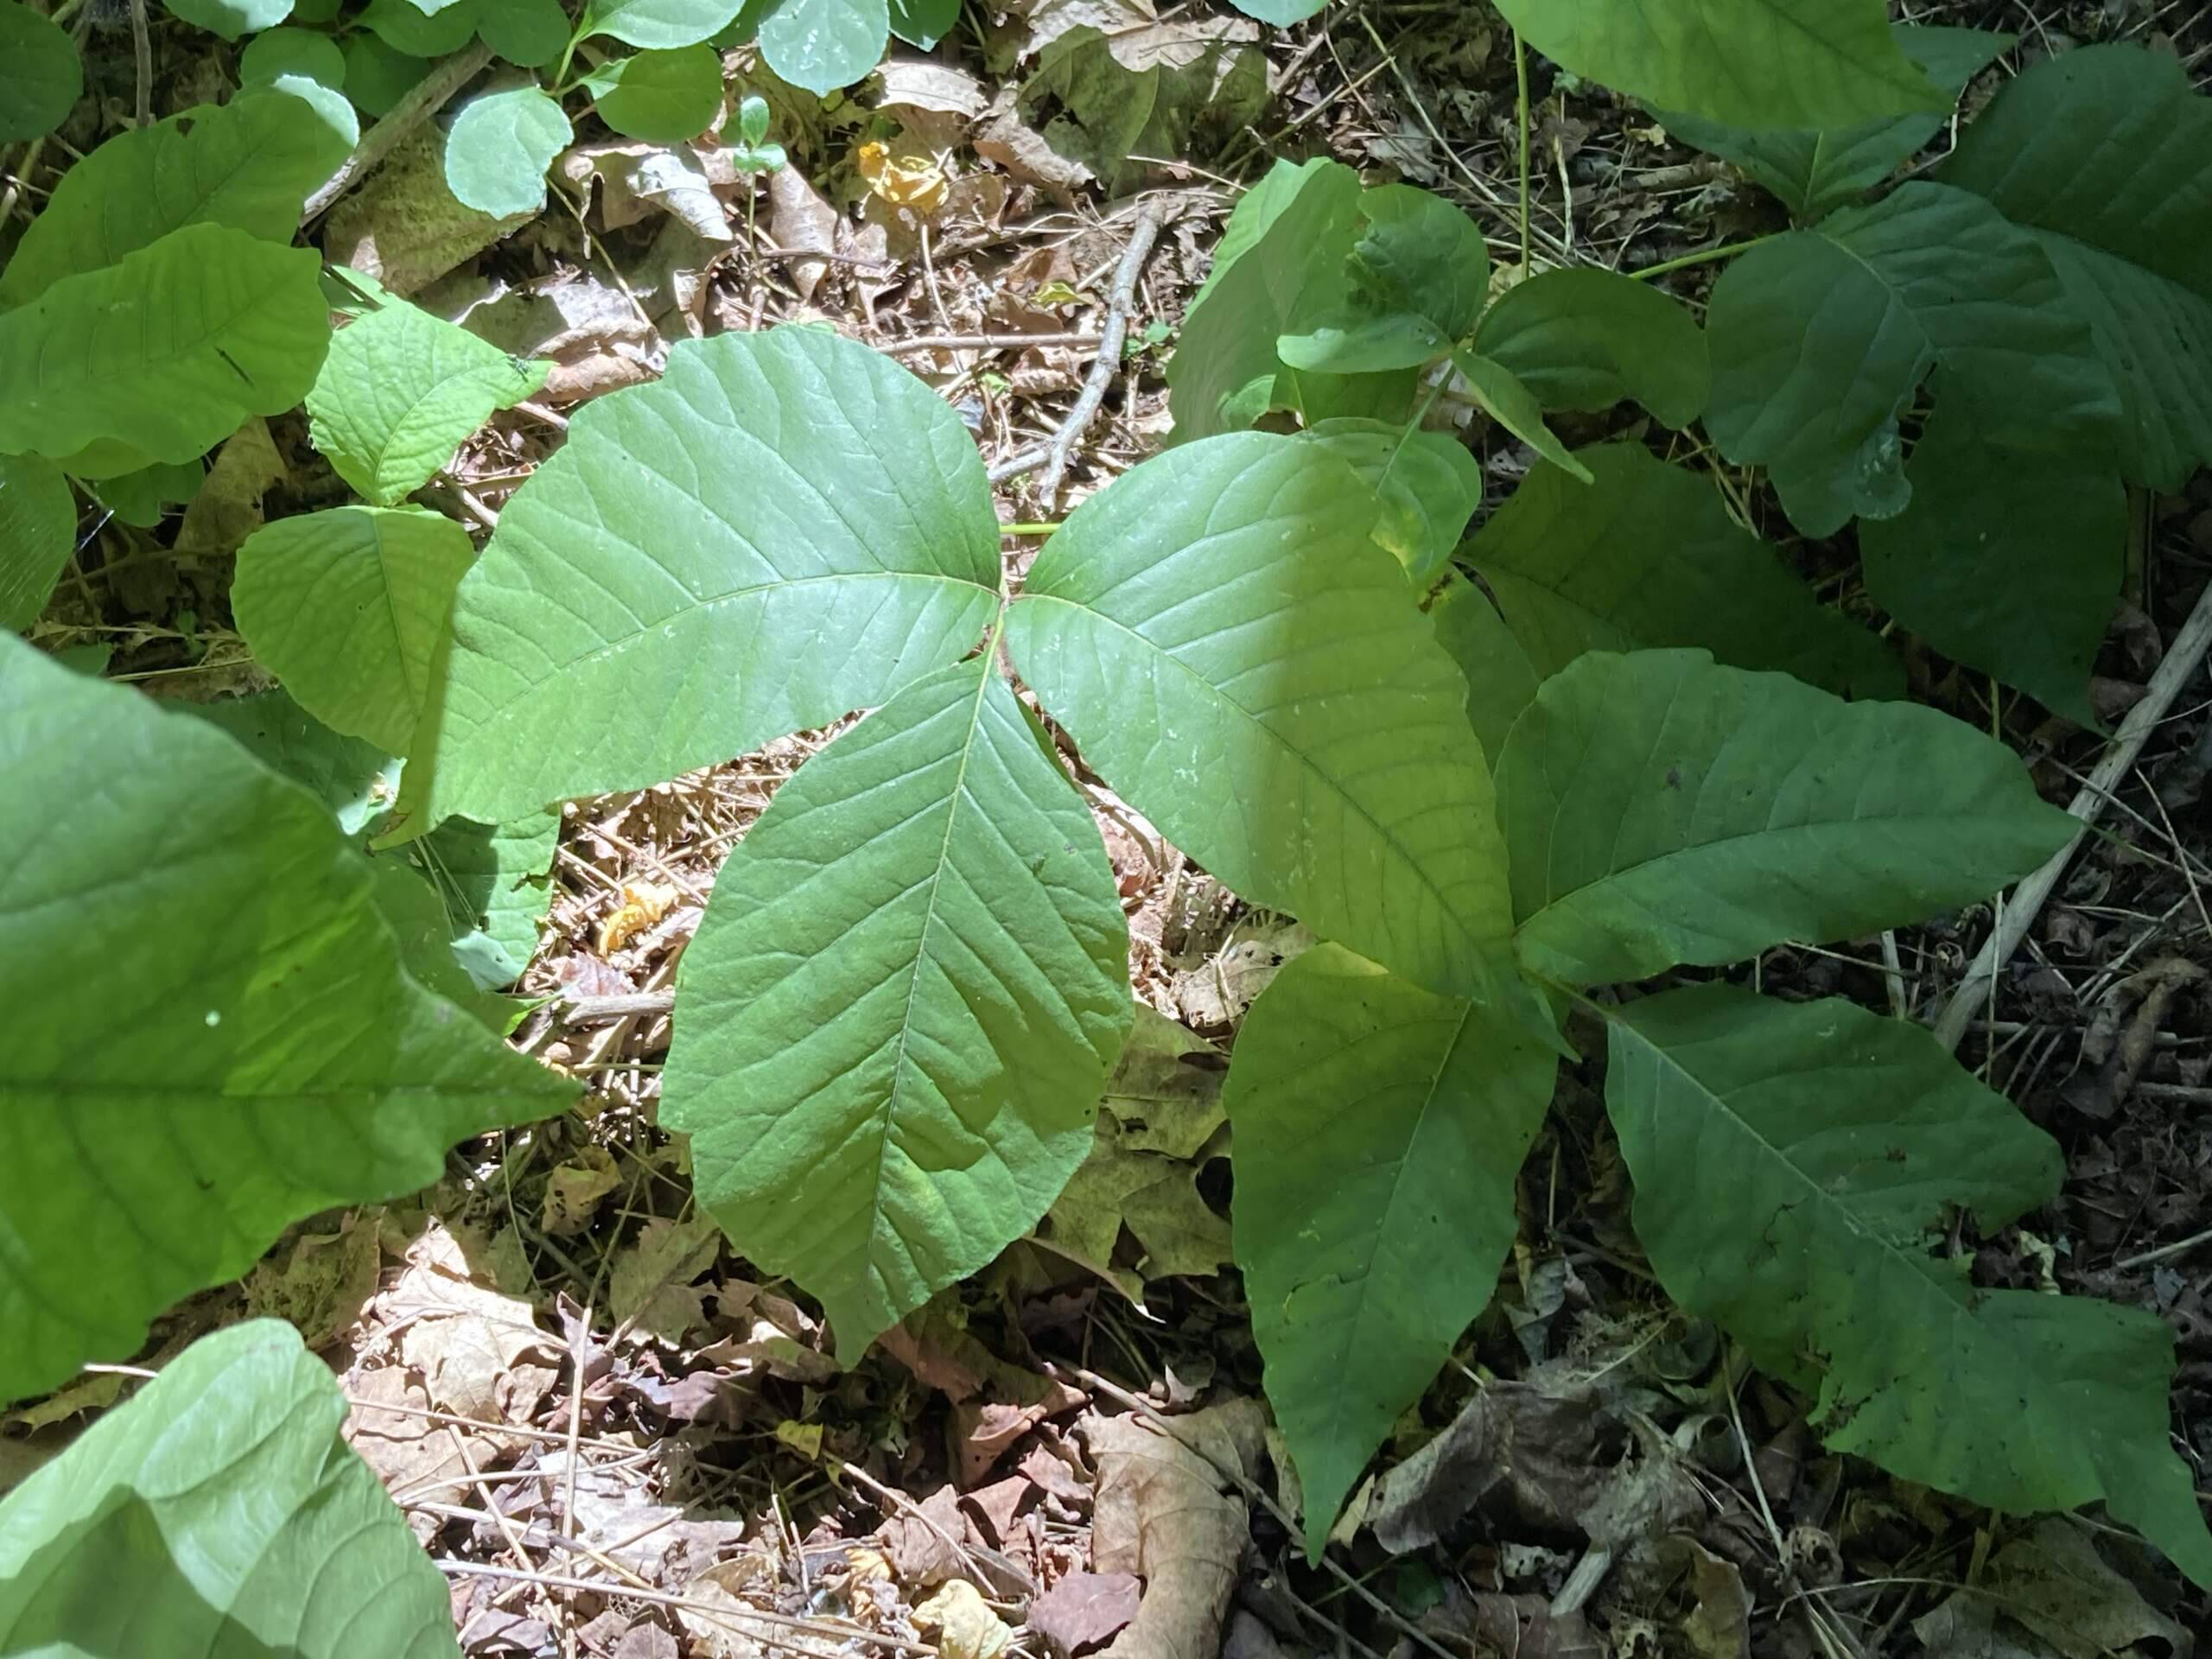 Poison ivy seems to thrive under climate change : Shots - Health News : NPR